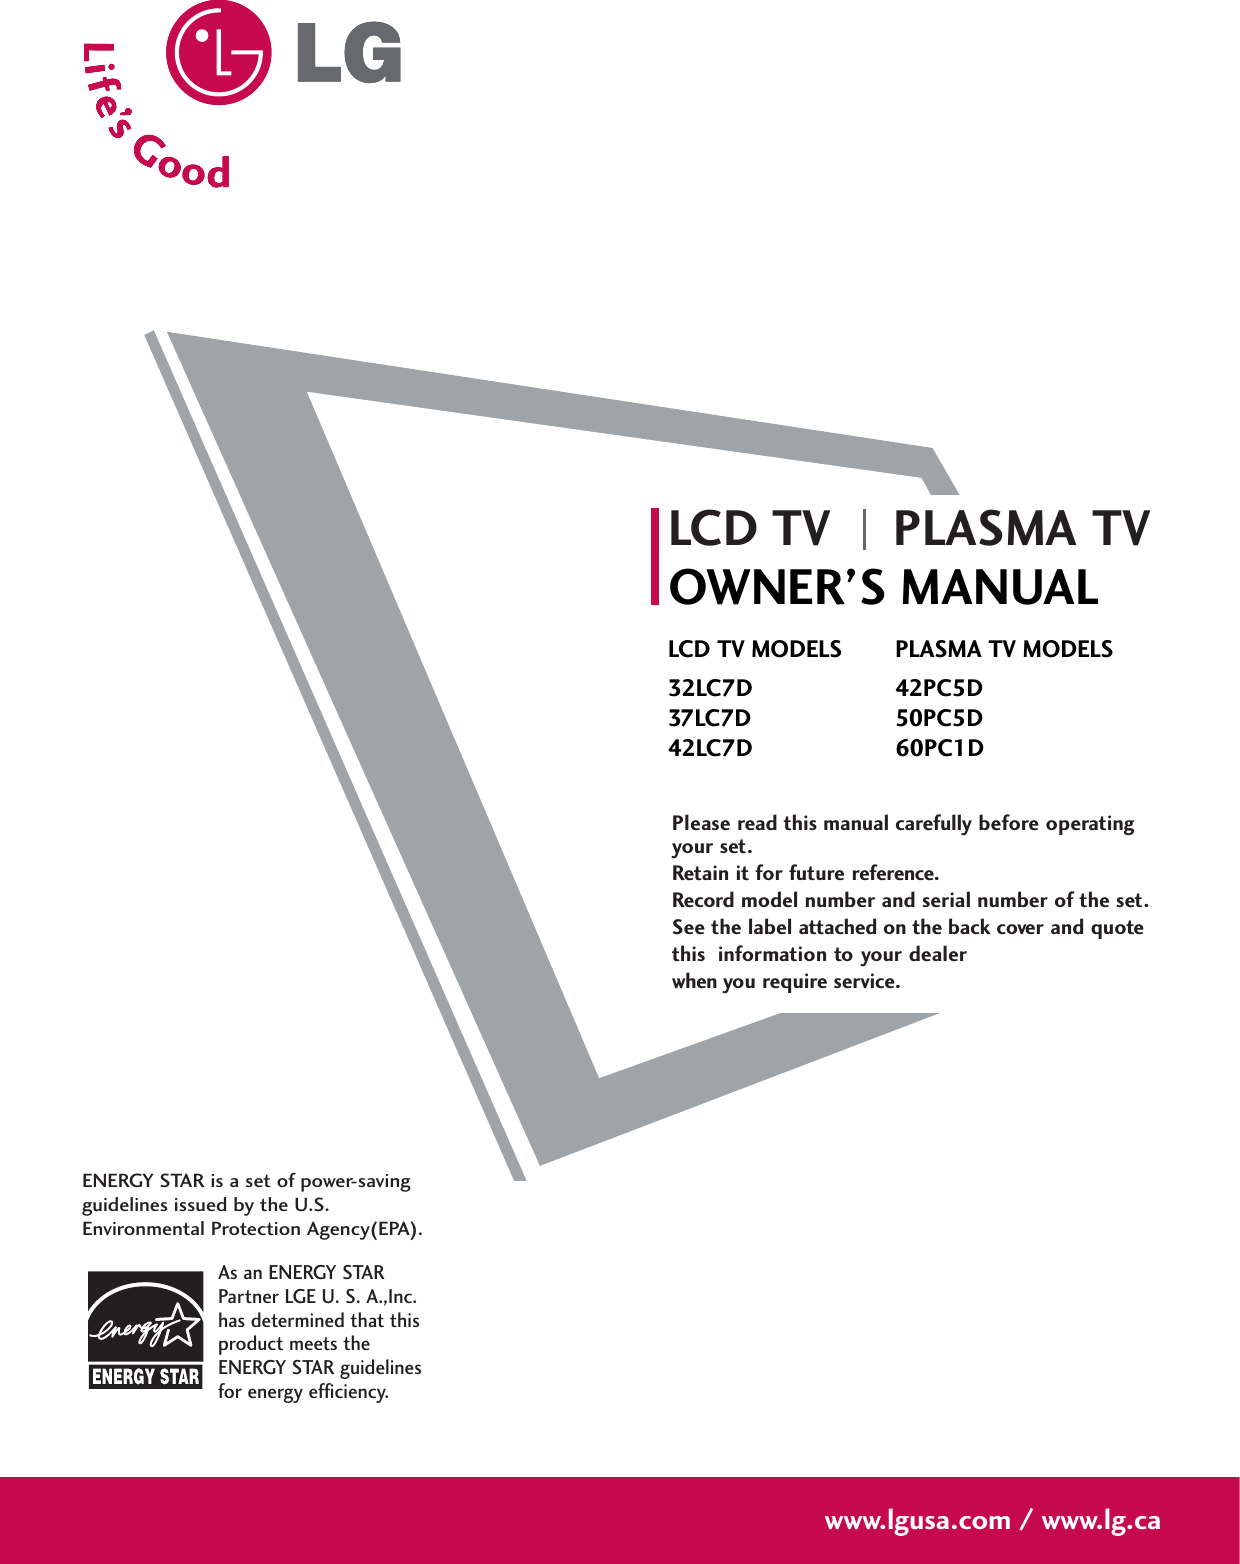 Please read this manual carefully before operatingyour set. Retain it for future reference.Record model number and serial number of the set. See the label attached on the back cover and quote this  information to your dealer when you require service.LCD TV PLASMA TVOWNER’S MANUALLCD TV MODELS32LC7D37LC7D42LC7DPLASMA TV MODELS42PC5D50PC5D60PC1Dwww.lgusa.com / www.lg.caAs an ENERGY STARPartner LGE U. S. A.,Inc.has determined that thisproduct meets theENERGY STAR guidelinesfor energy efficiency.ENERGY STAR is a set of power-savingguidelines issued by the U.S.Environmental Protection Agency(EPA).